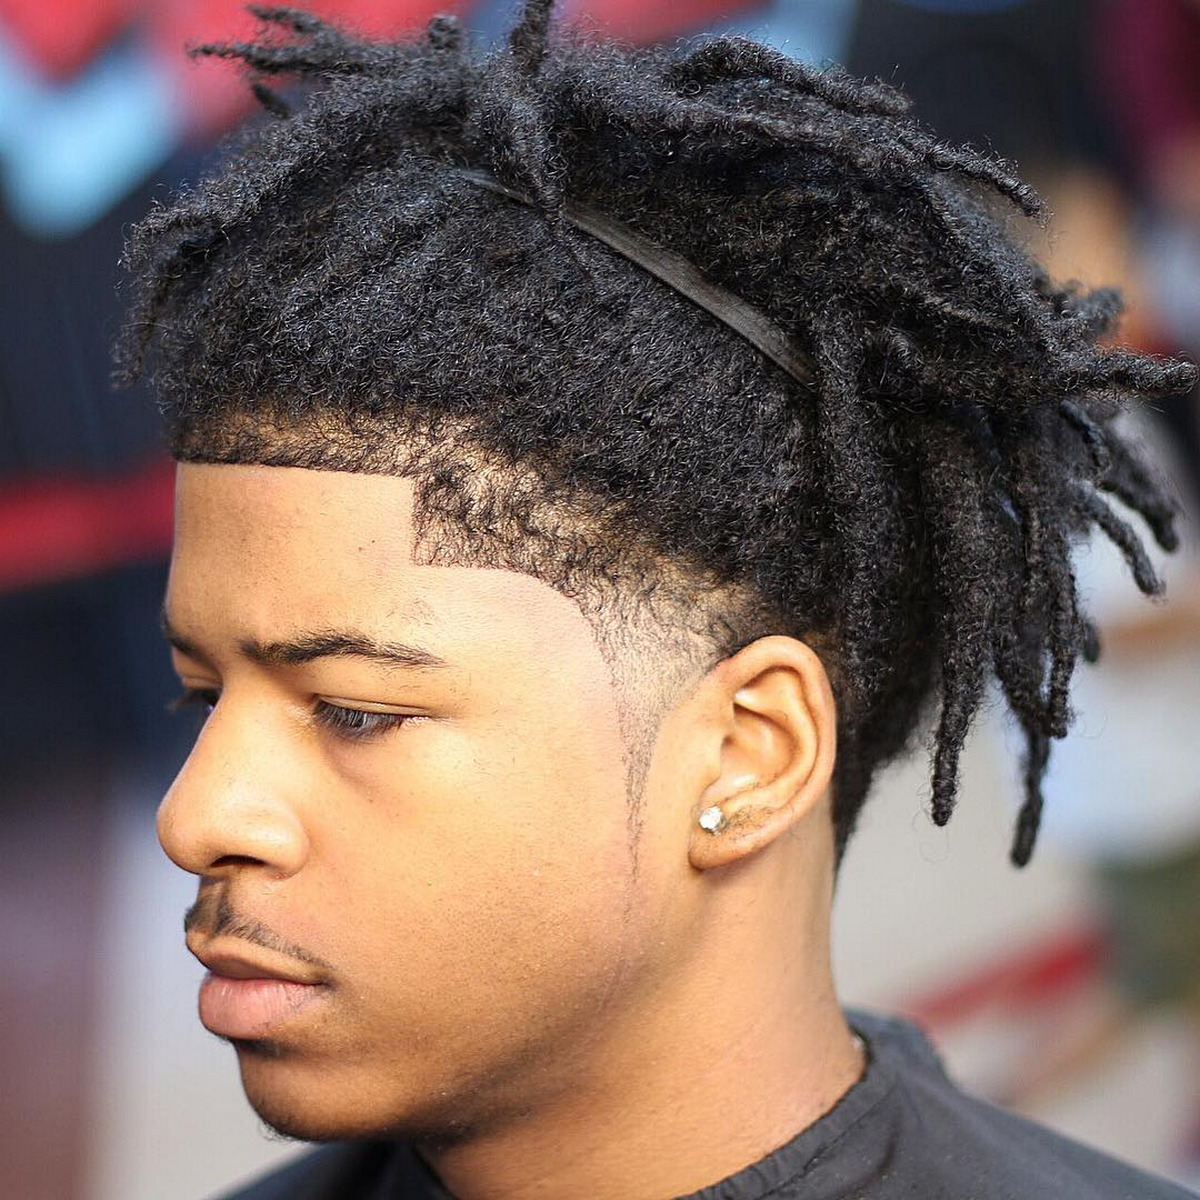 Uplifted Dreads with a Shape-Up